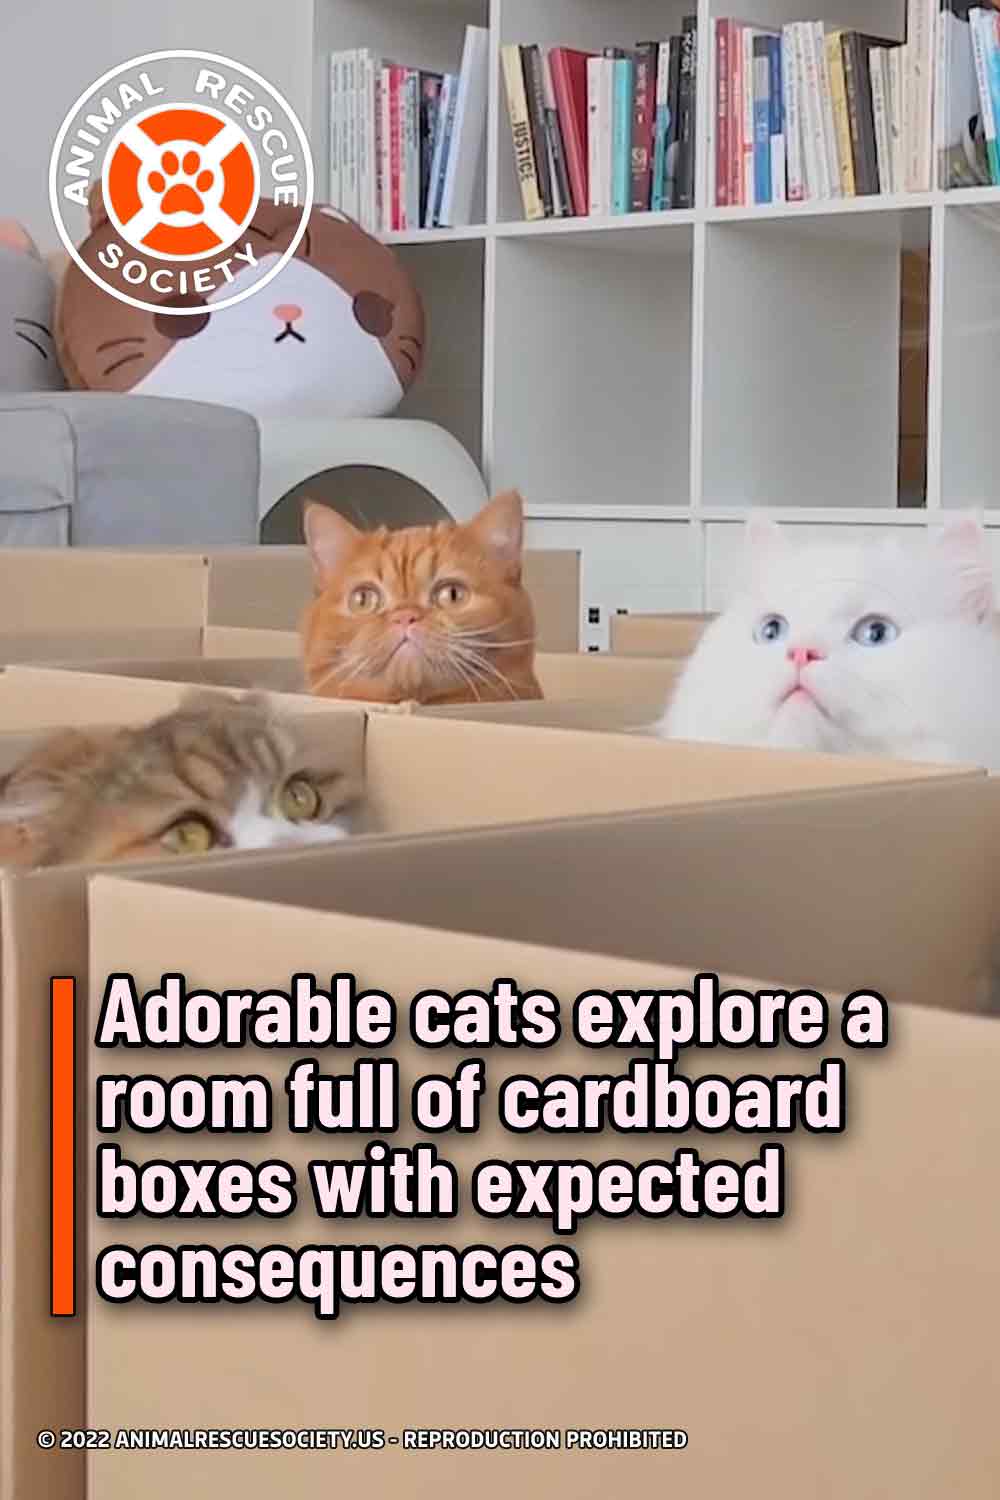 Adorable cats explore a room full of cardboard boxes with expected consequences